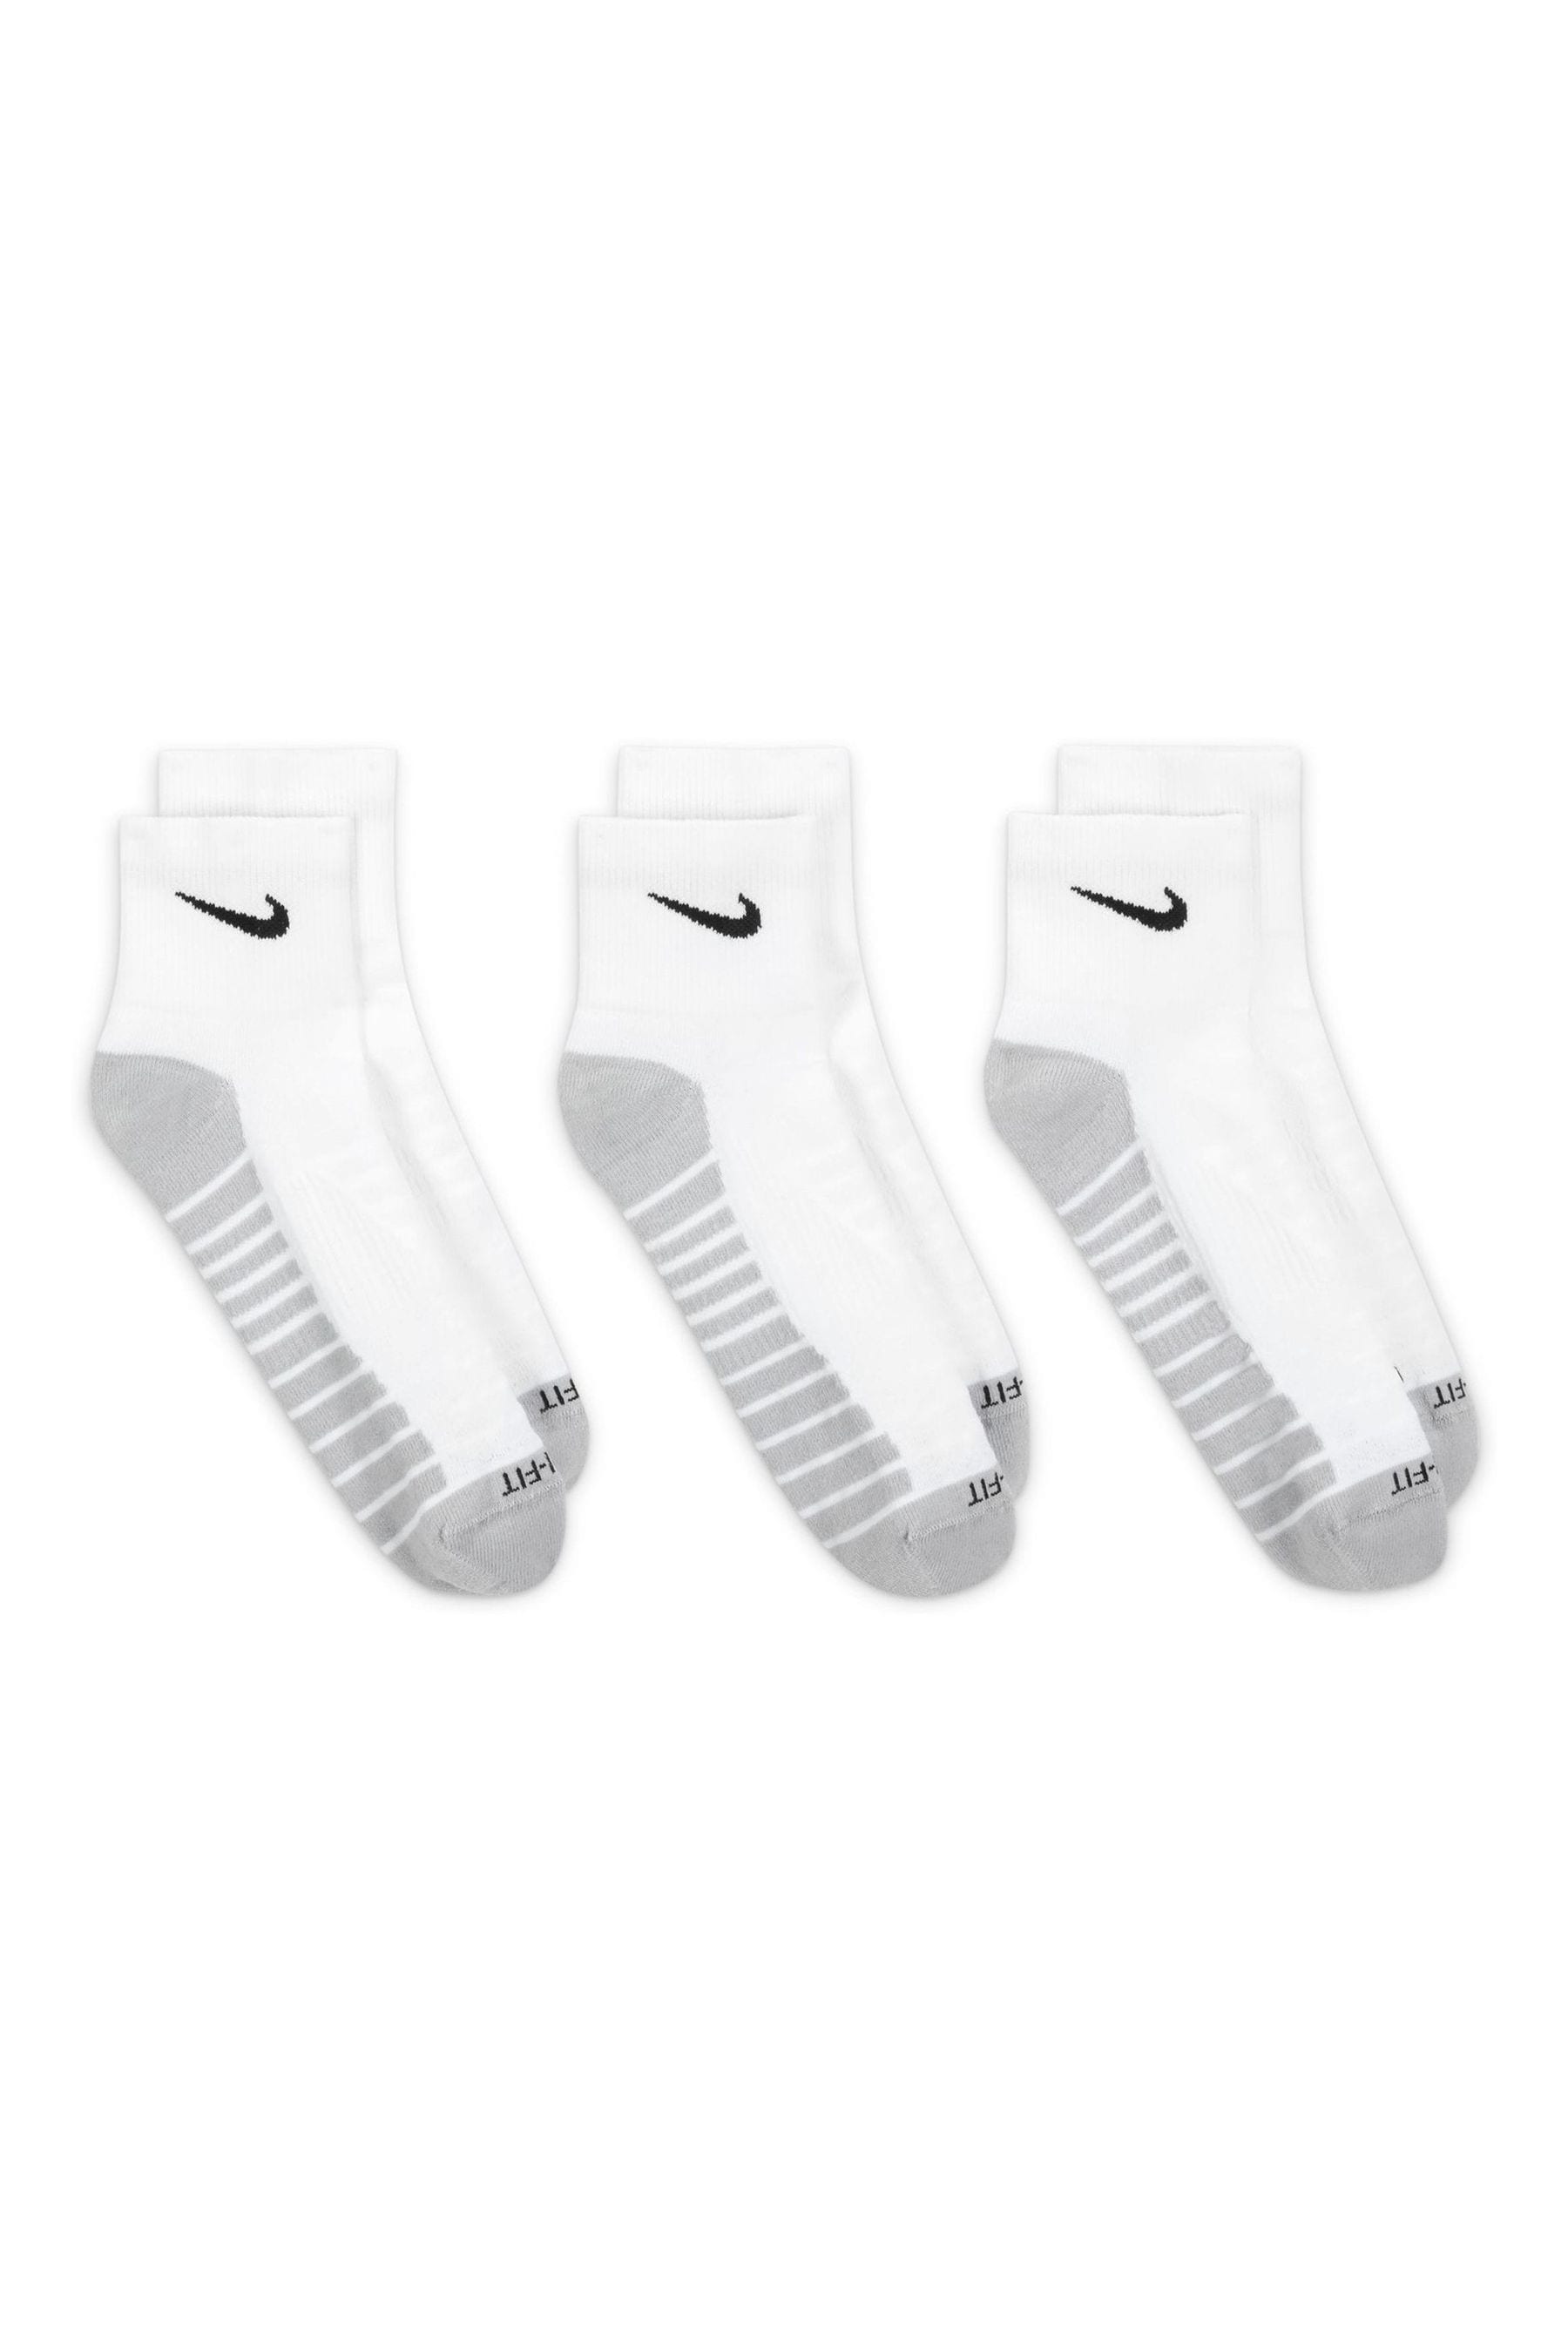 Buy Nike White Cushioned Crew Socks 3 Pack from the Next UK online shop